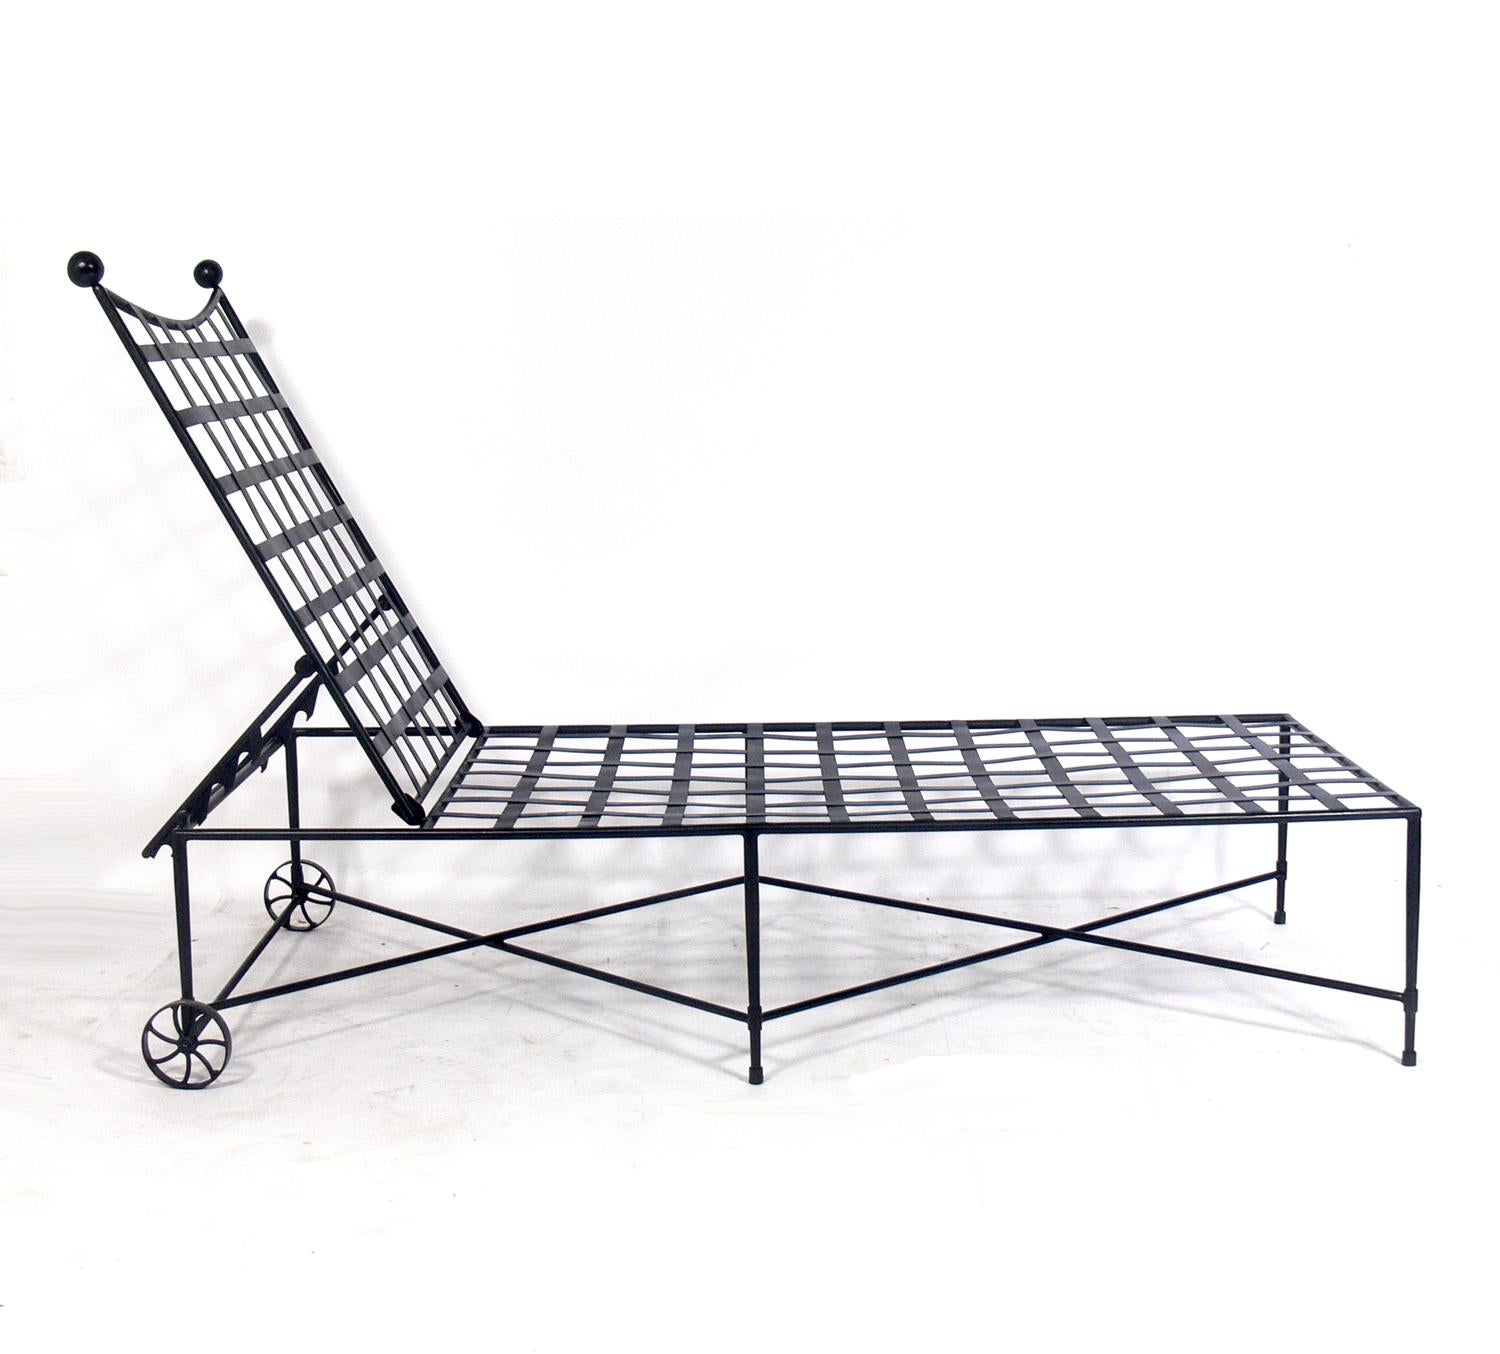 Sculptural iron chaise lounge chairs, designed by Mario Papperzini for Salterini, Italian, circa 1960s. They are a versatile form and can be used indoors or outdoors. This design was used by Yves Saint Laurent in his personal residence at la Rue de